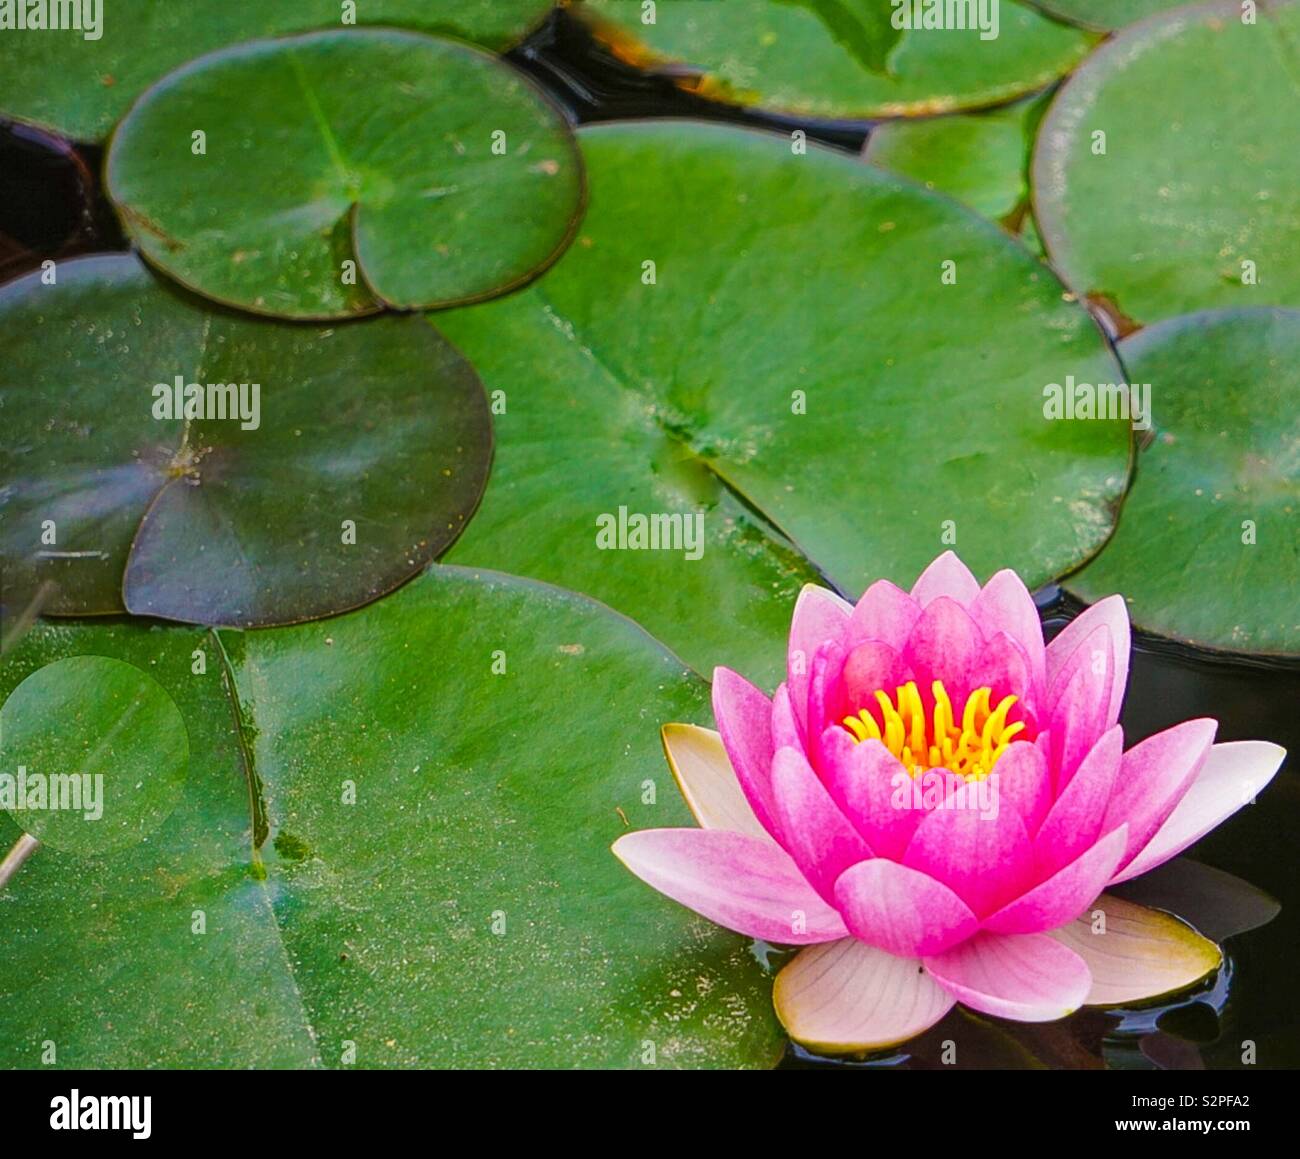 A pink lotus in full bloom with lily pads in a pond Stock Photo